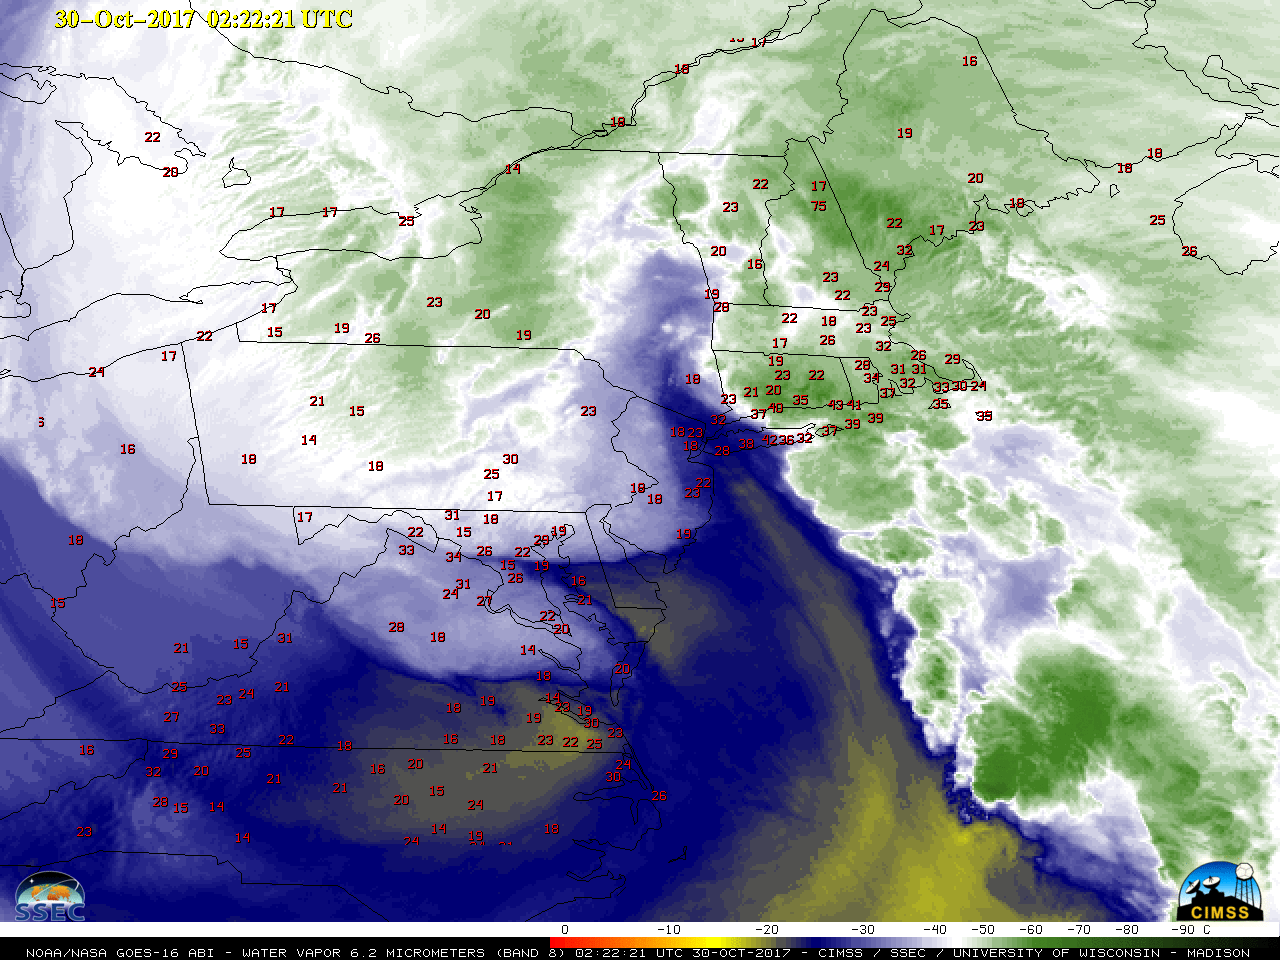 GOES-16 Upper-level Water Vapor (6.2 µm) images, with hourly surface wind gusts (in knots) plotted in red [click to play MP4 animation]